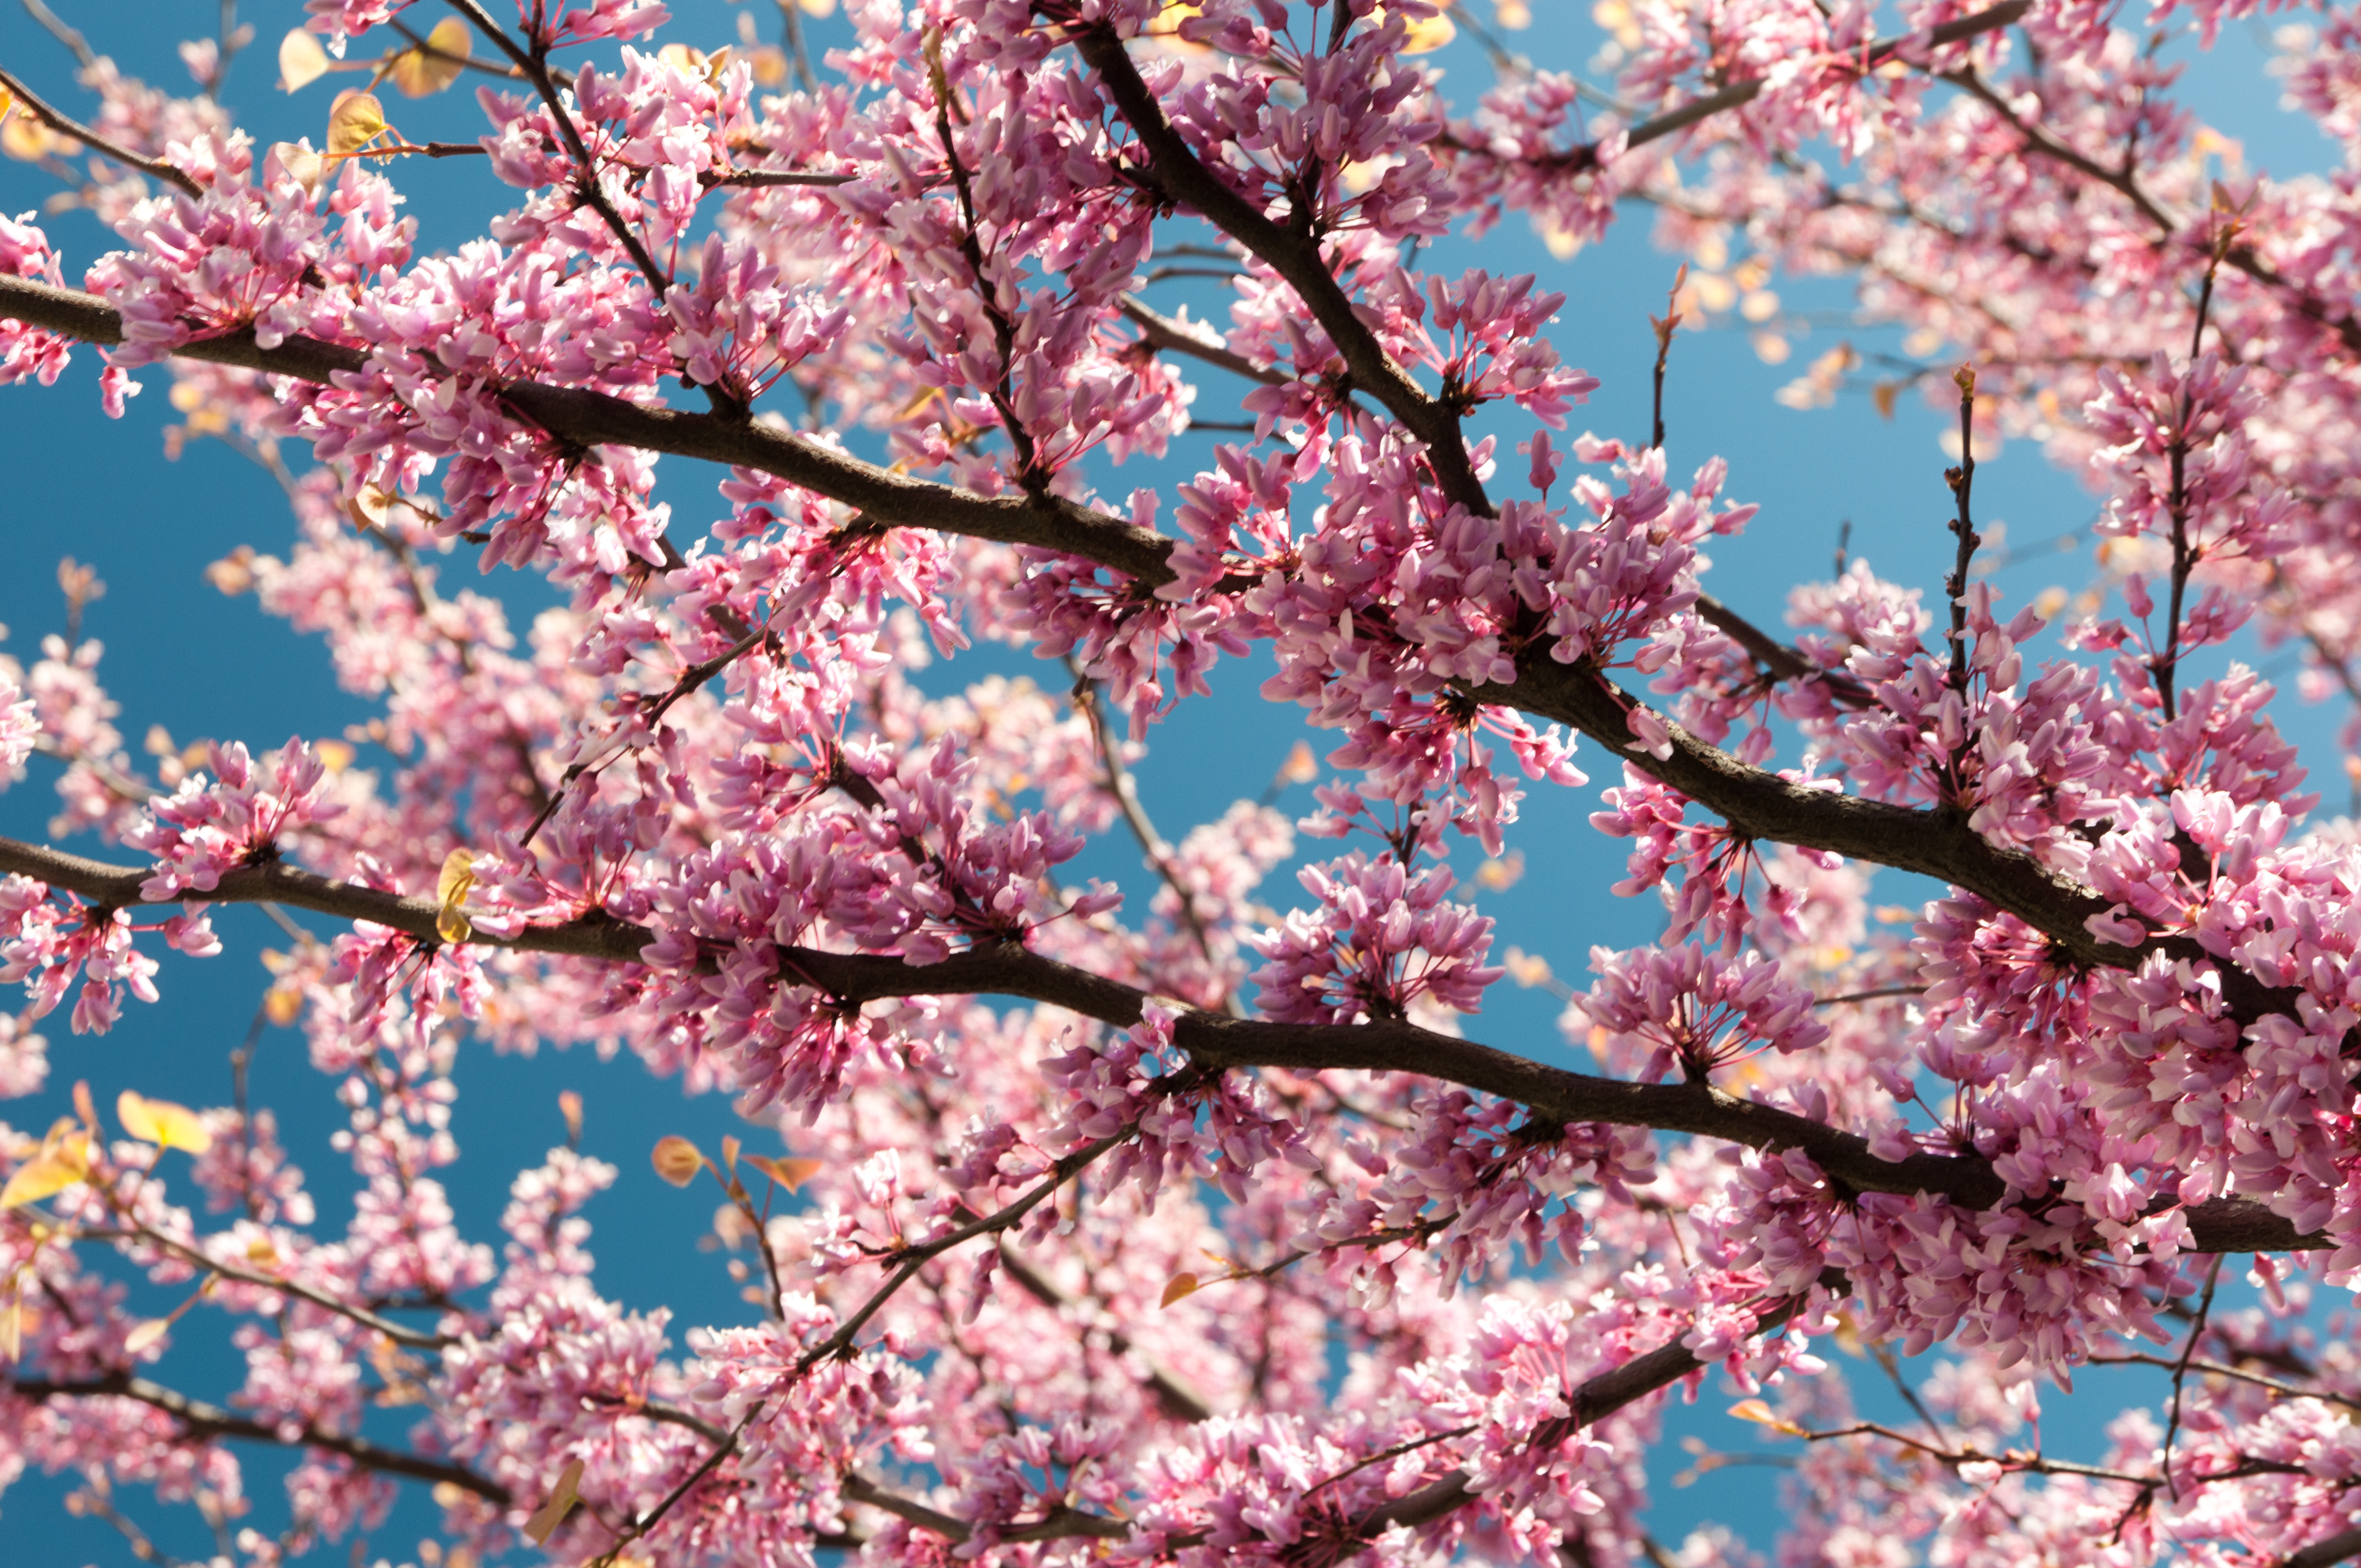 Pink Blossom Branches 4k Ultra HD Wallpaper | Background Image